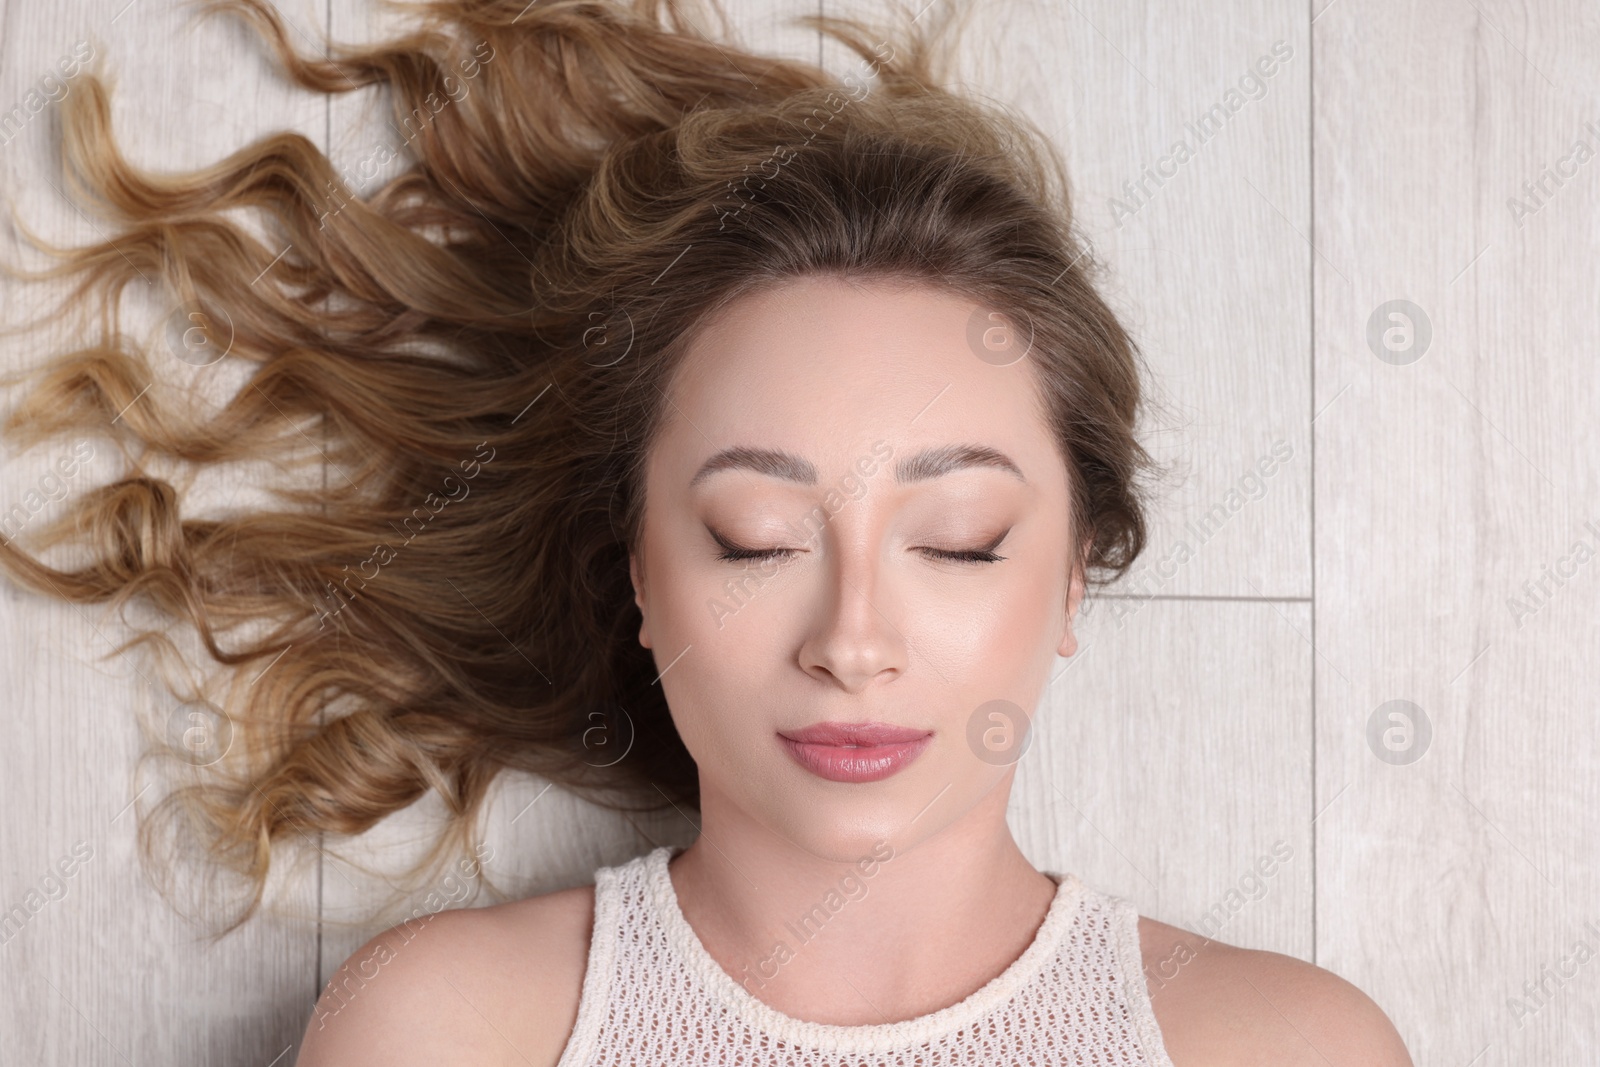 Photo of Portrait of beautiful woman with closed eyes on wooden floor, top view